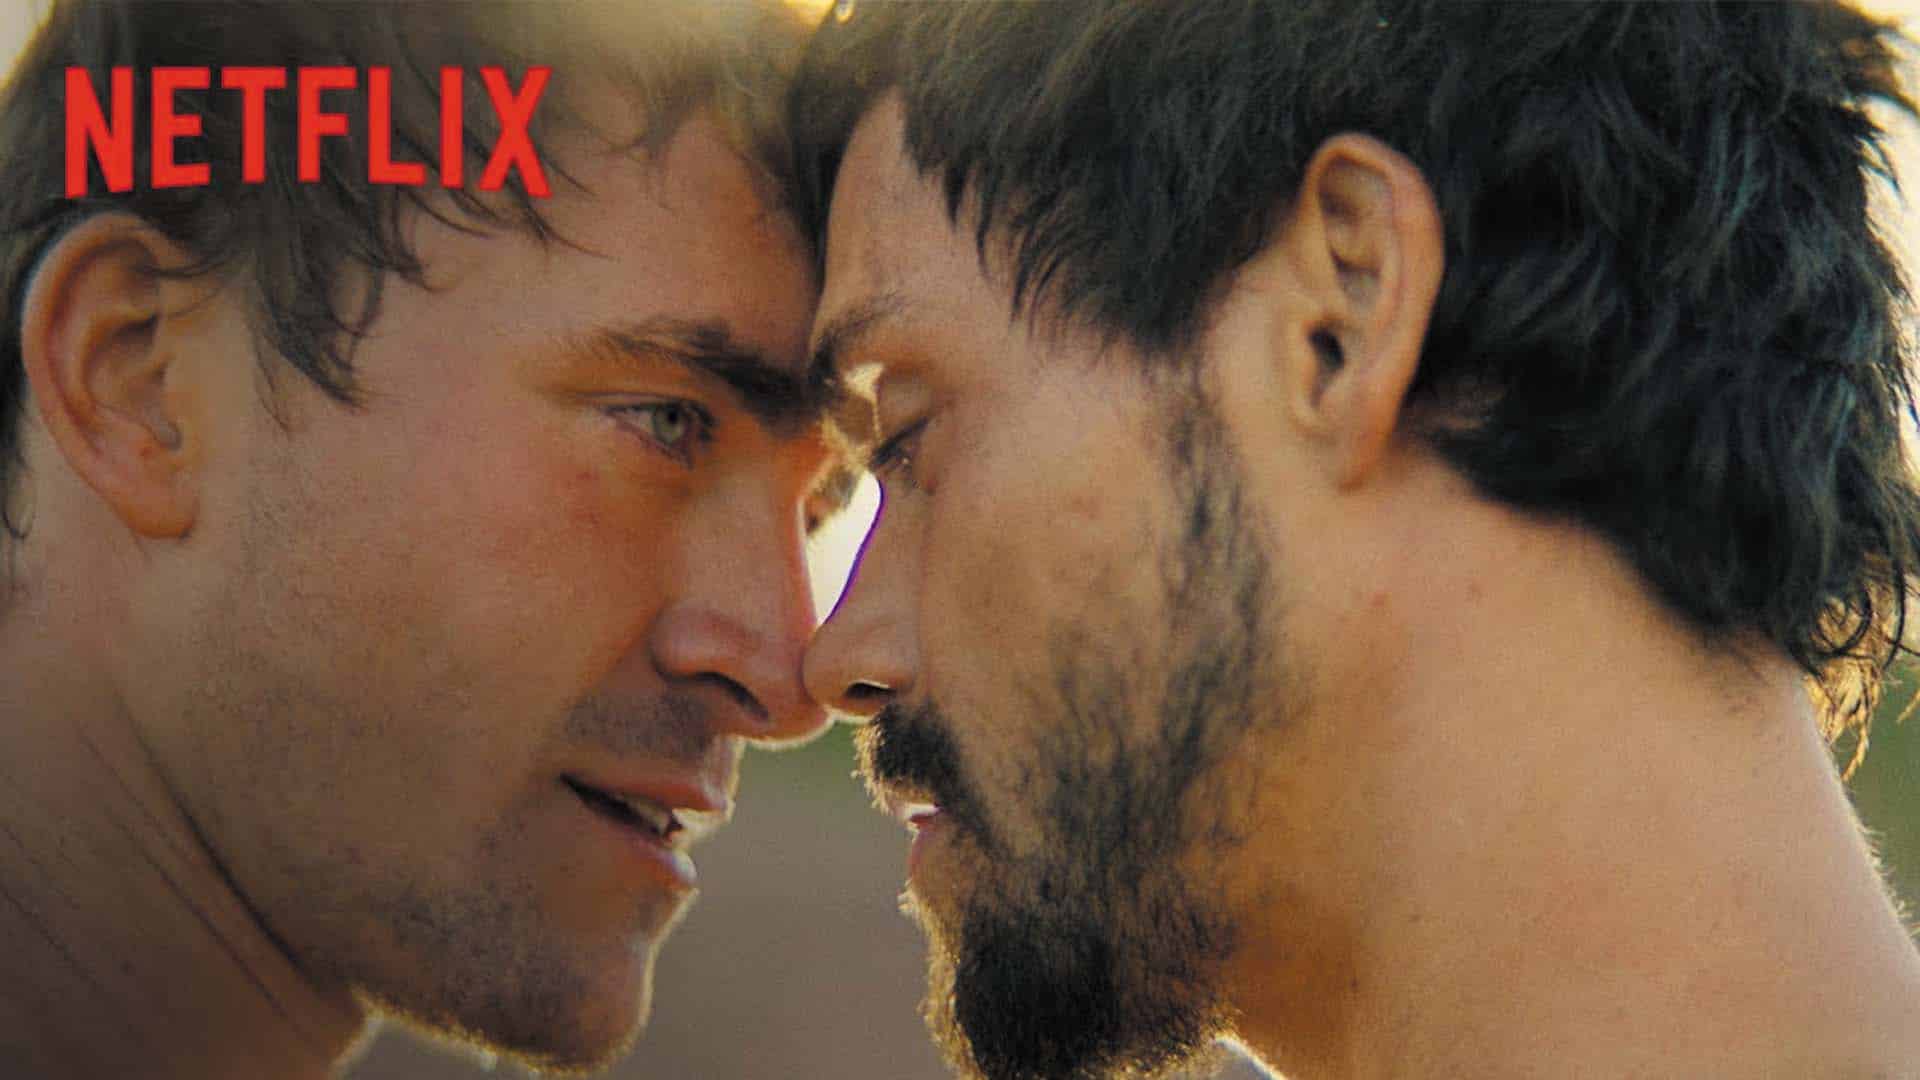 image A new Netflix doco shows Alexander the Great as queer, and some viewers aren’t happy